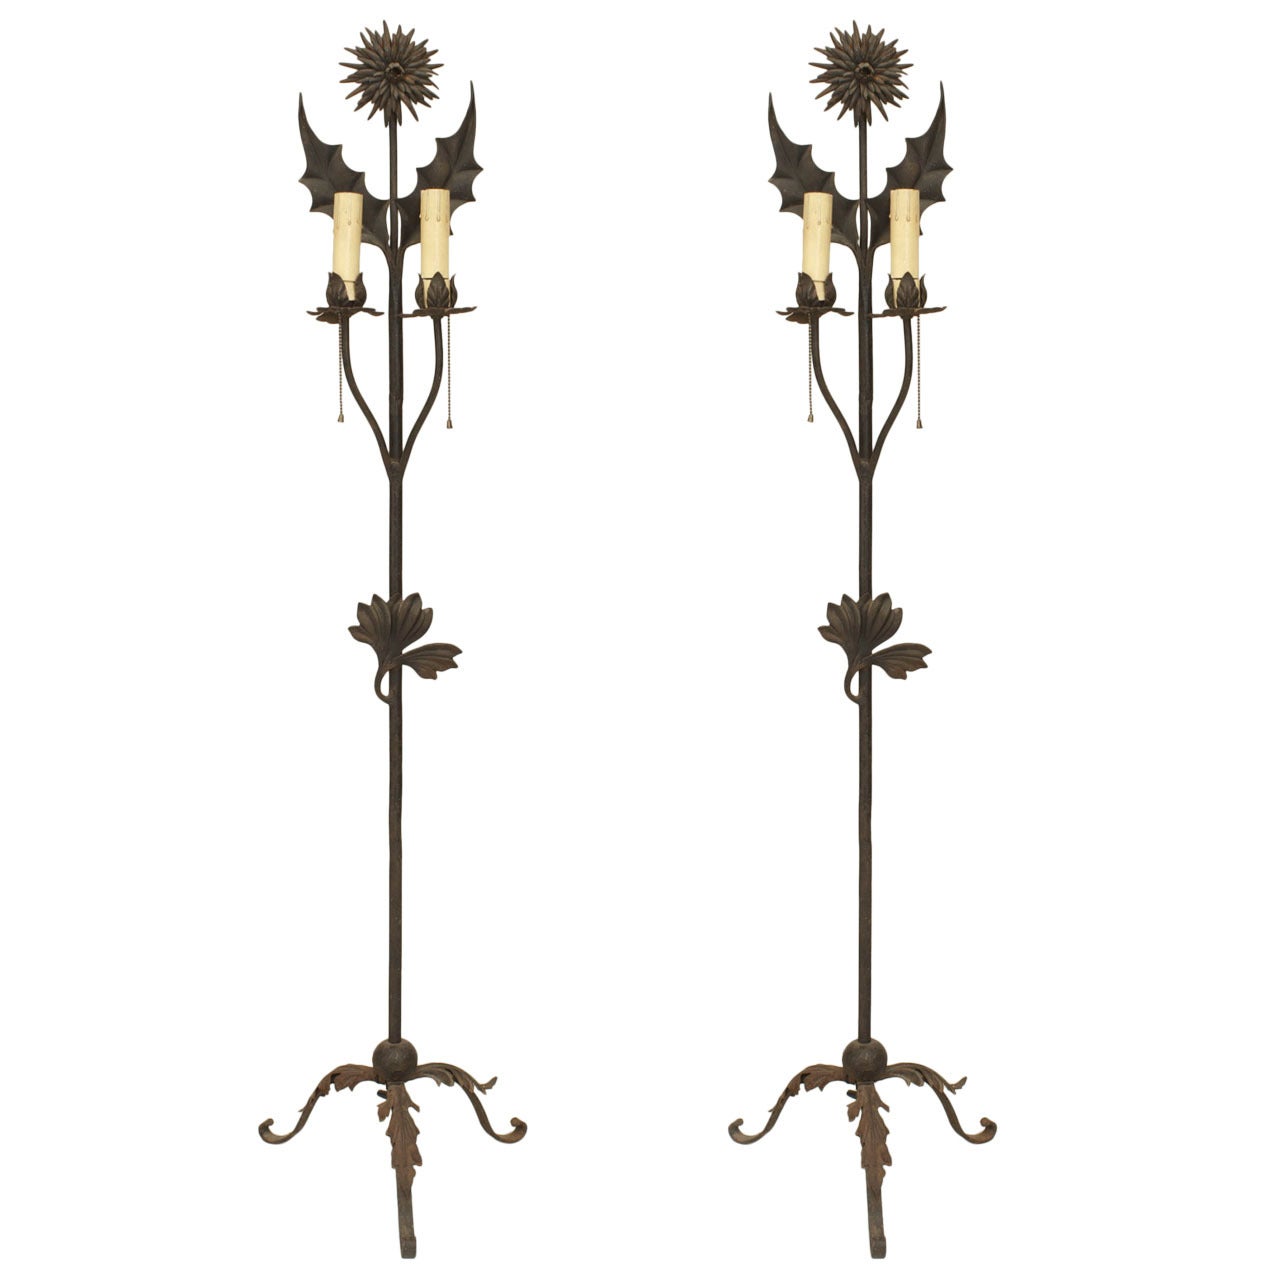 Pair of English Aesthetic Wrought Iron Floral Floor Lamps